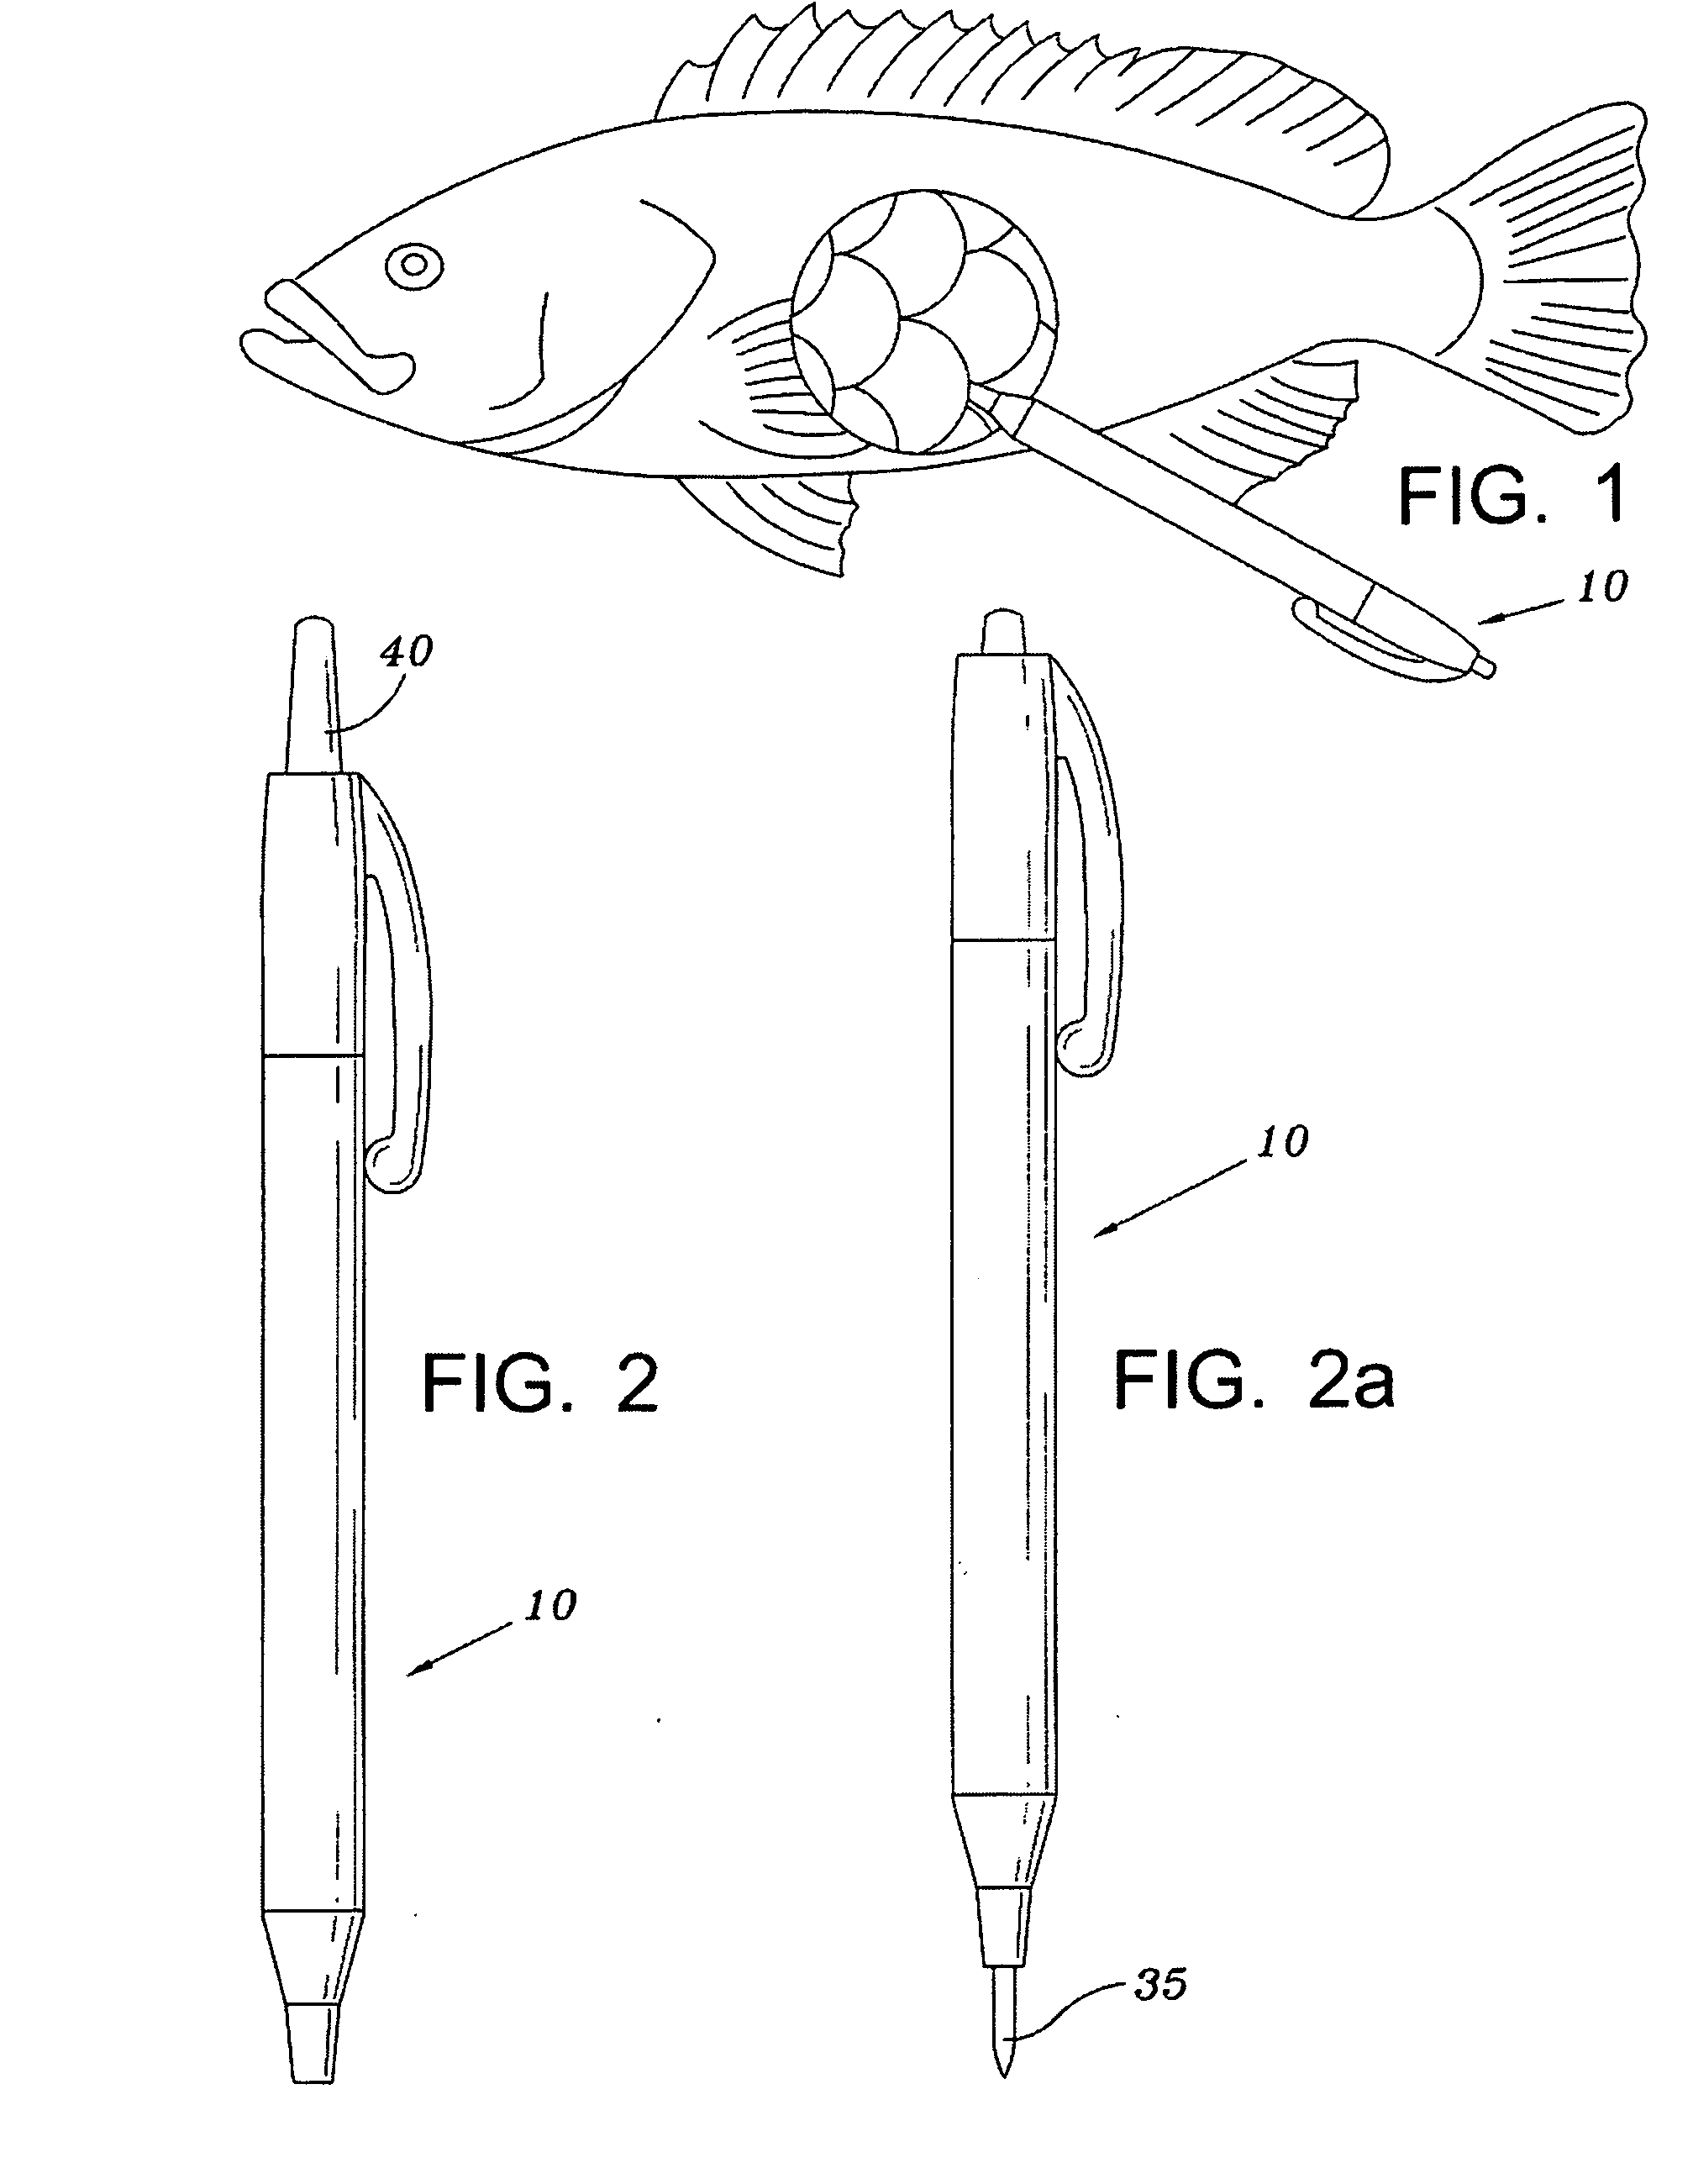 Device for Releasing Gas Trapped in Fish